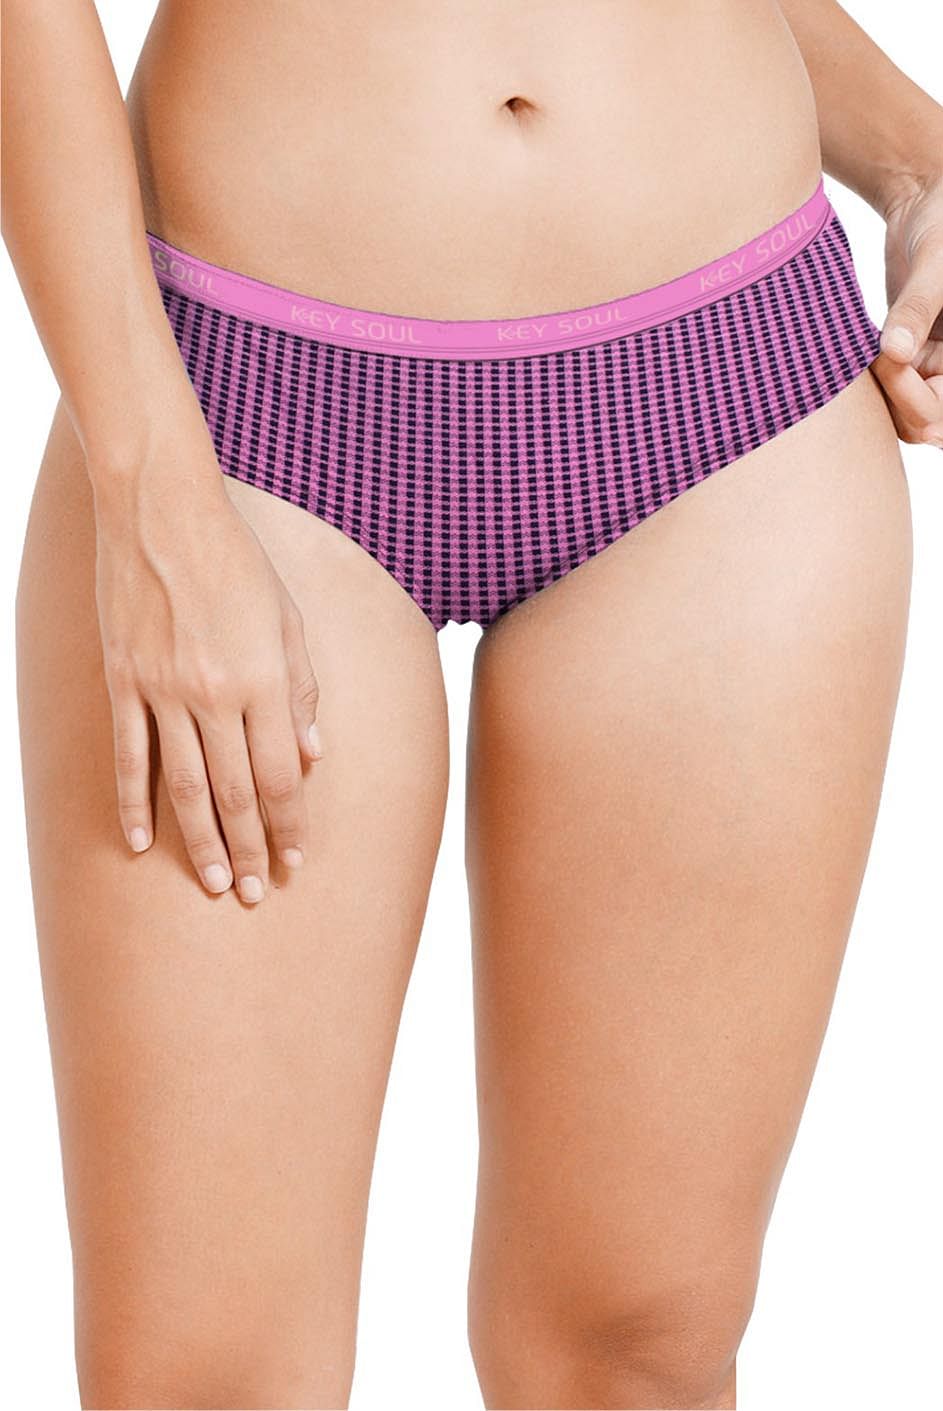 Printed Outer Elastic Panty Pack of 3 - KS002 - Pack - 30 - 3xl/105